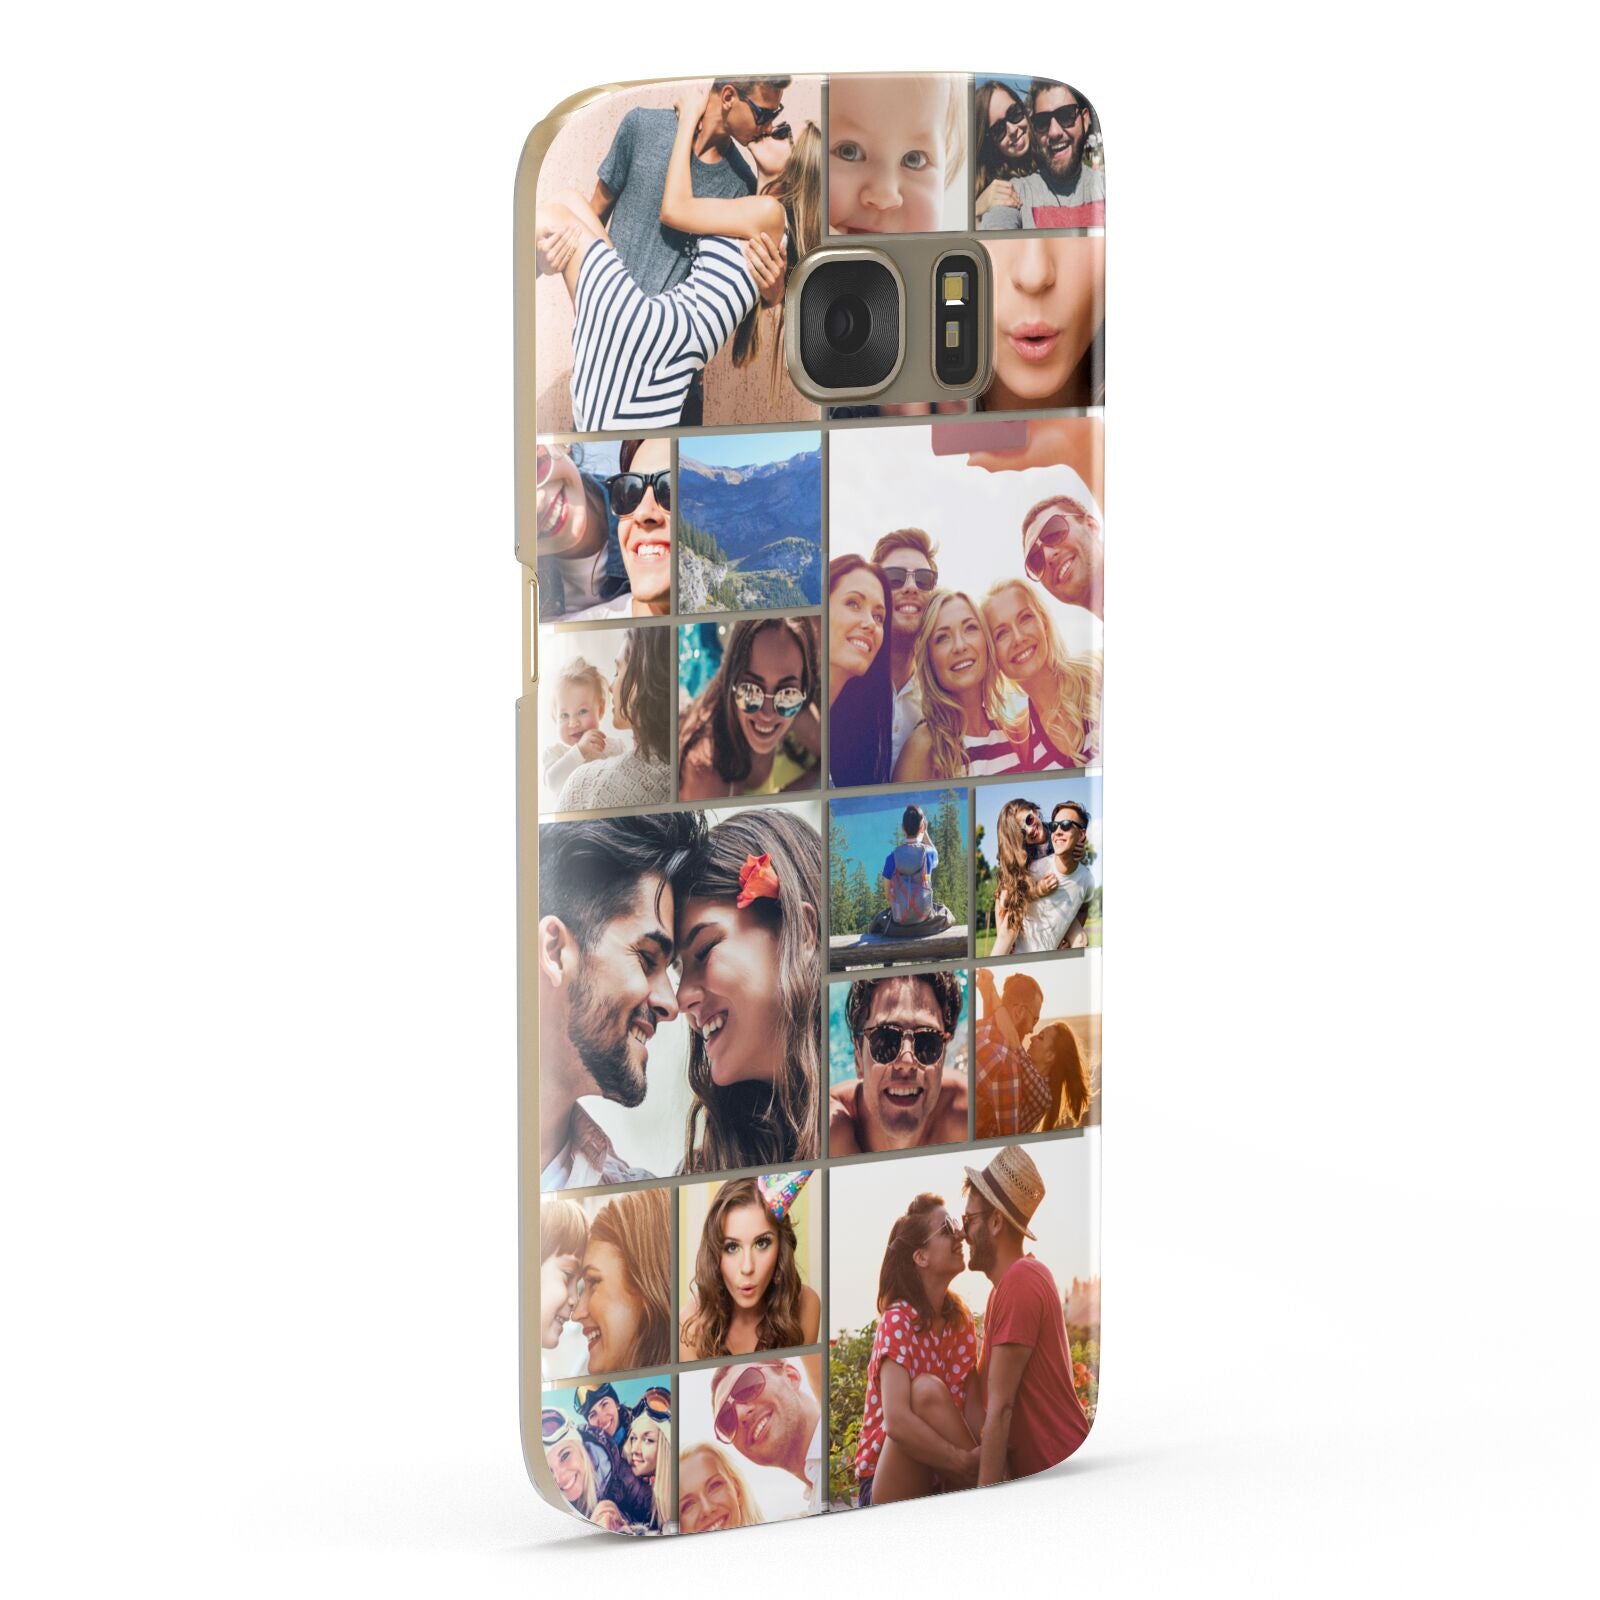 Photo Grid Samsung Galaxy Case Fourty Five Degrees